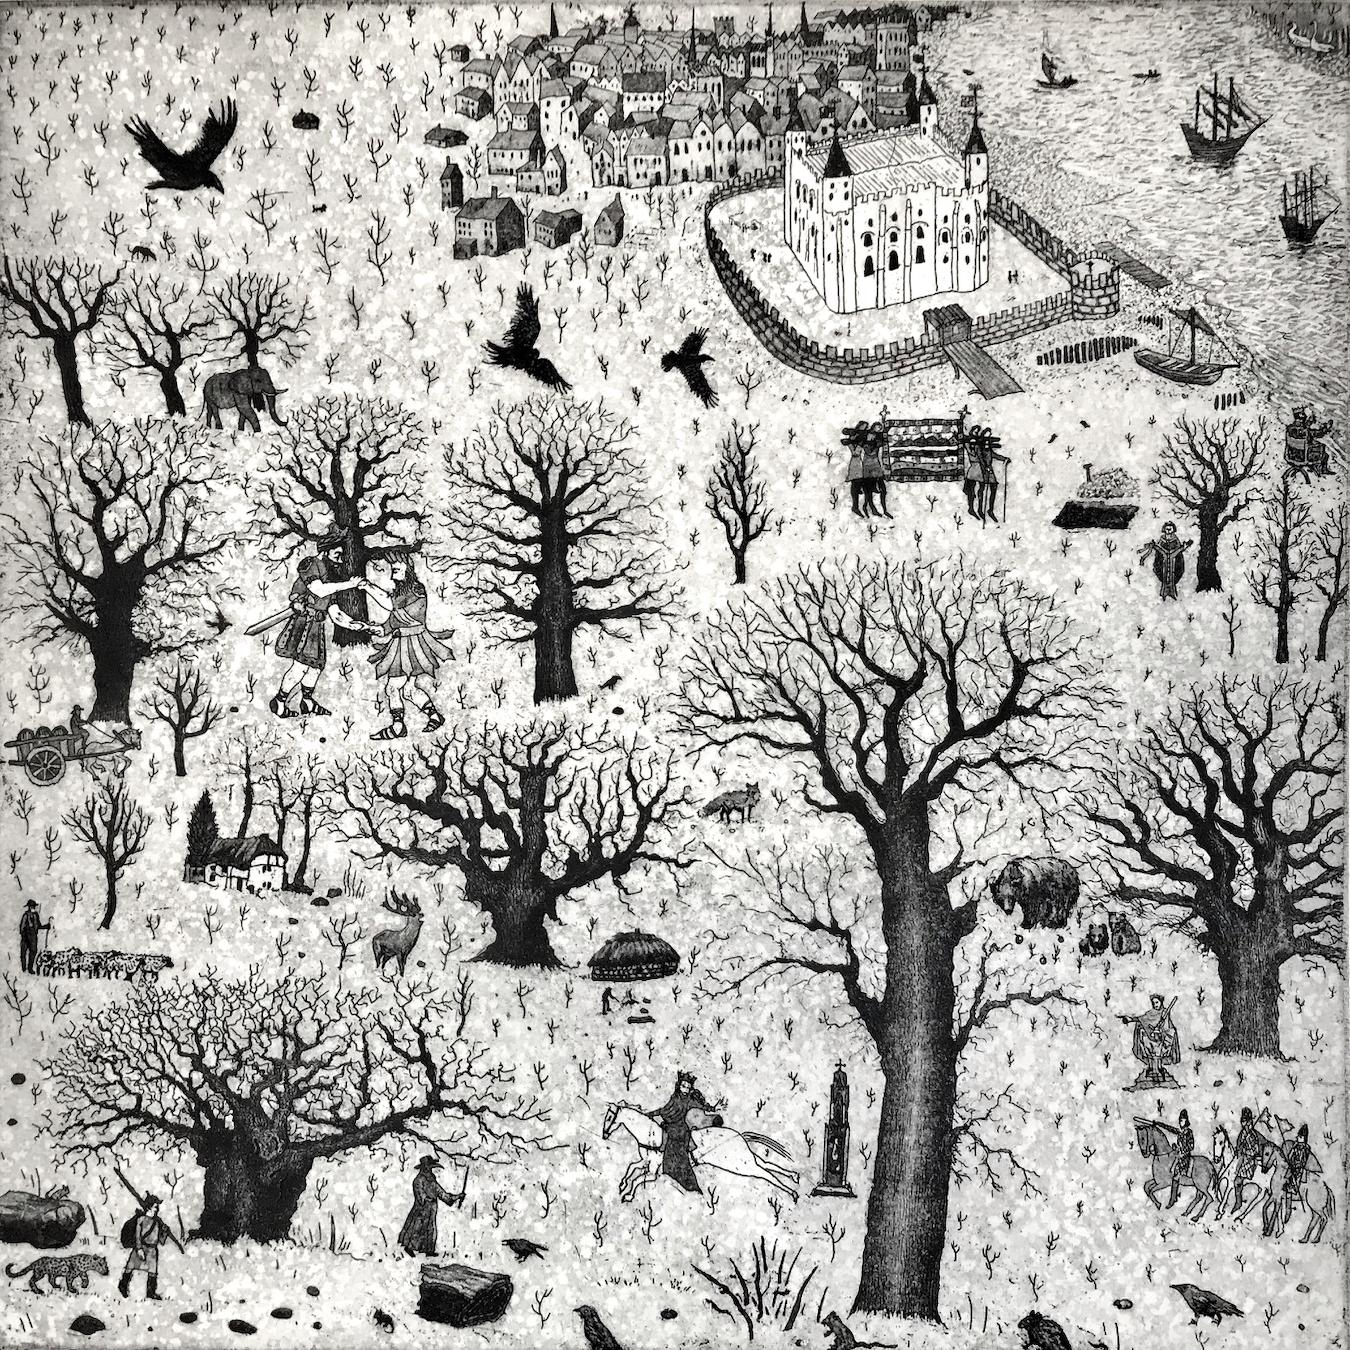 Tim Southall  Landscape Print - A Tale of London, Tim Southall, Illustration and folk art, Limited edition 